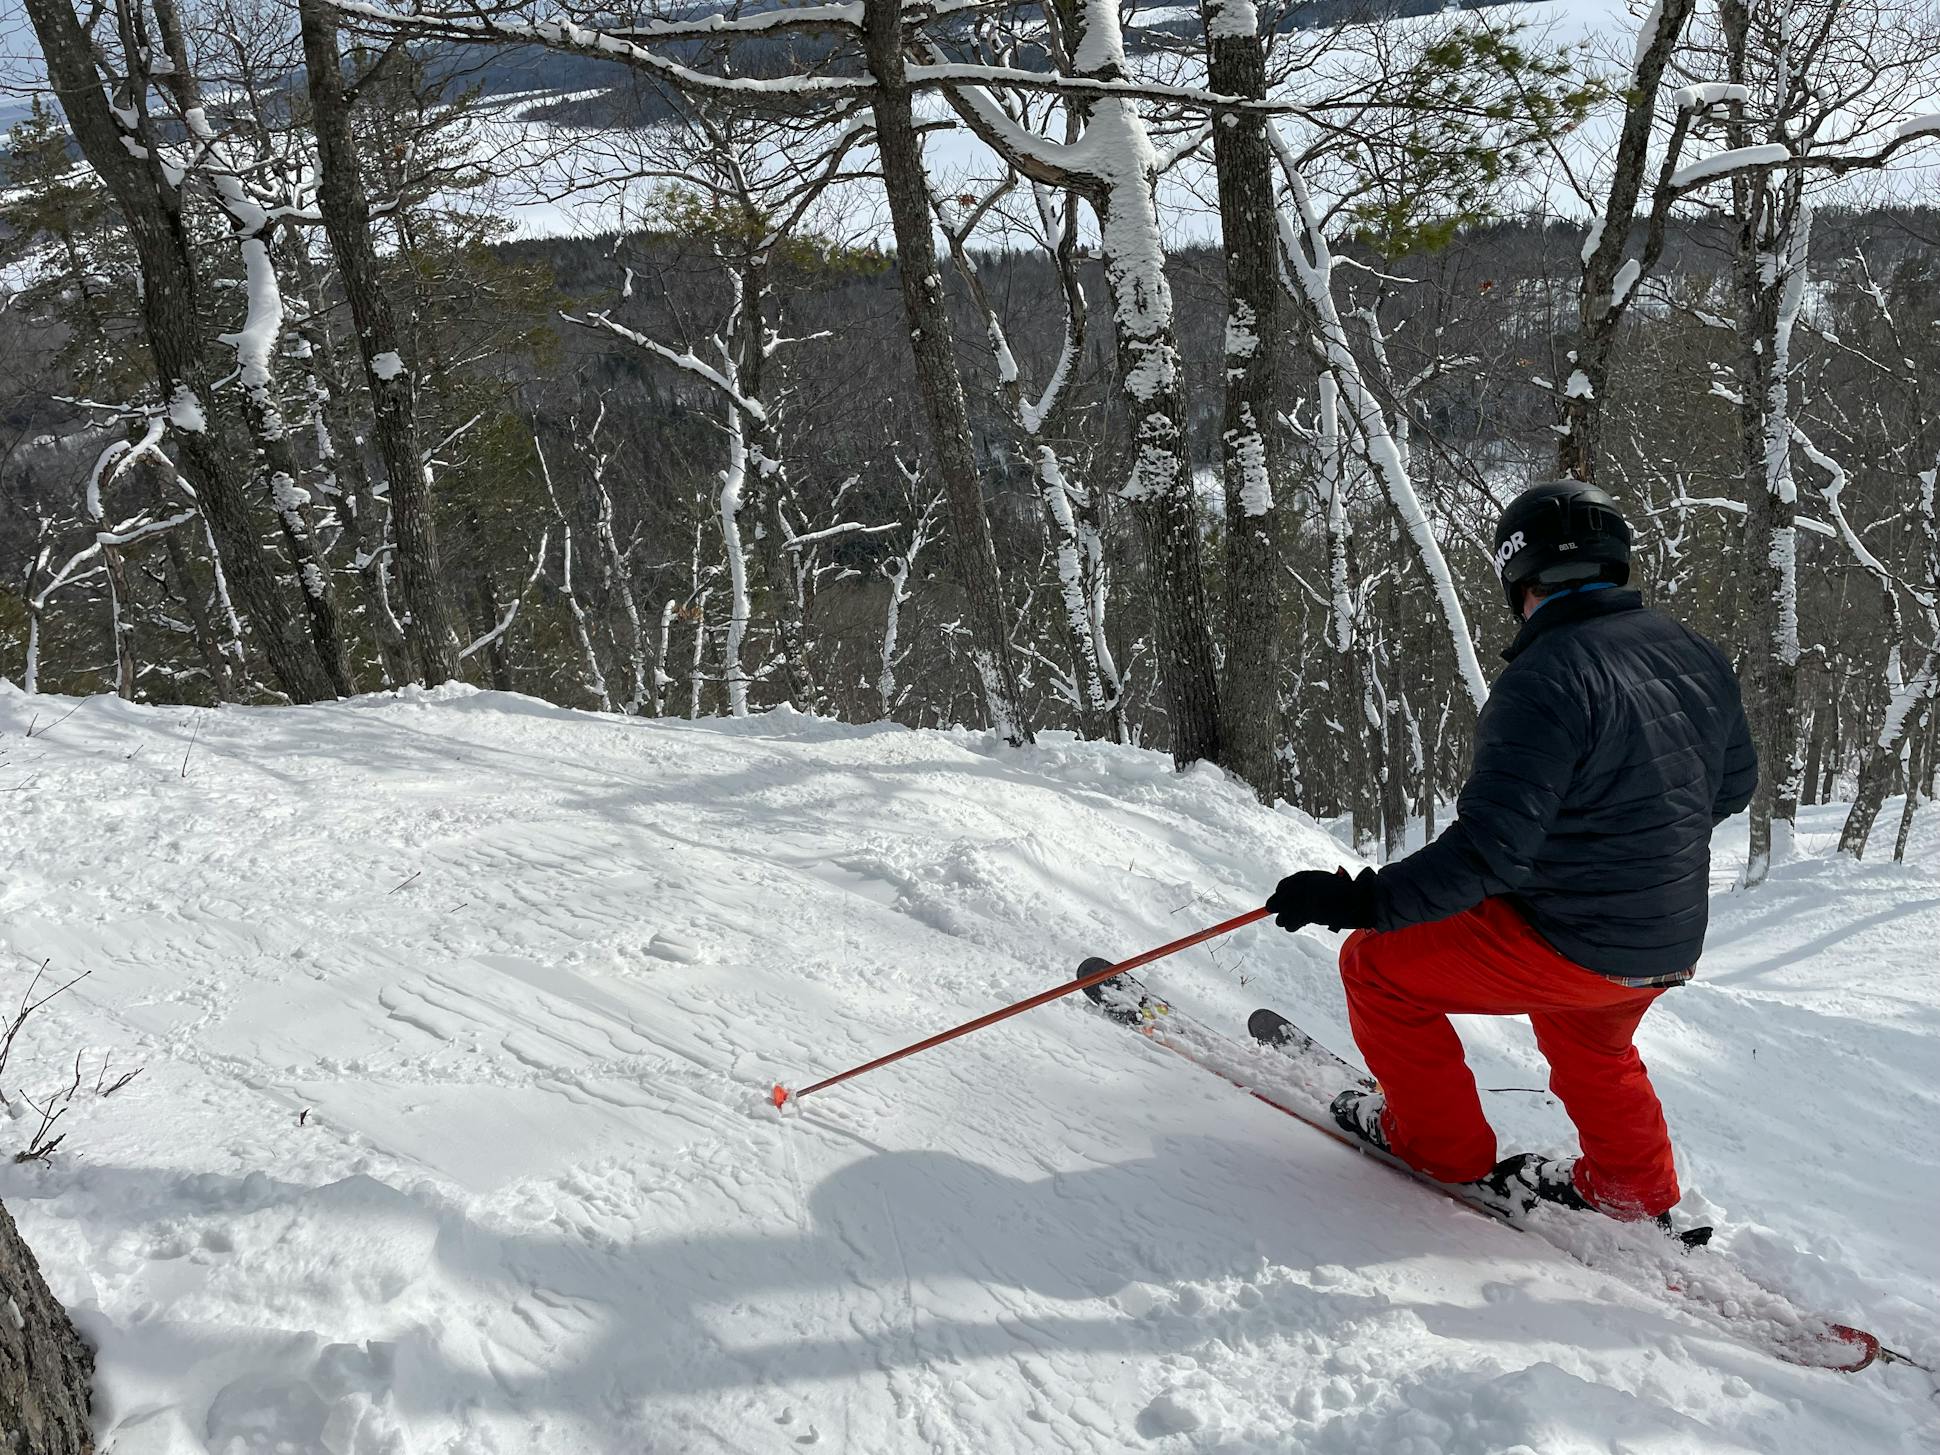 Tree runs abound on the backside of Mount Bohemia — a challenge for even expert skiers and snowboarders. 